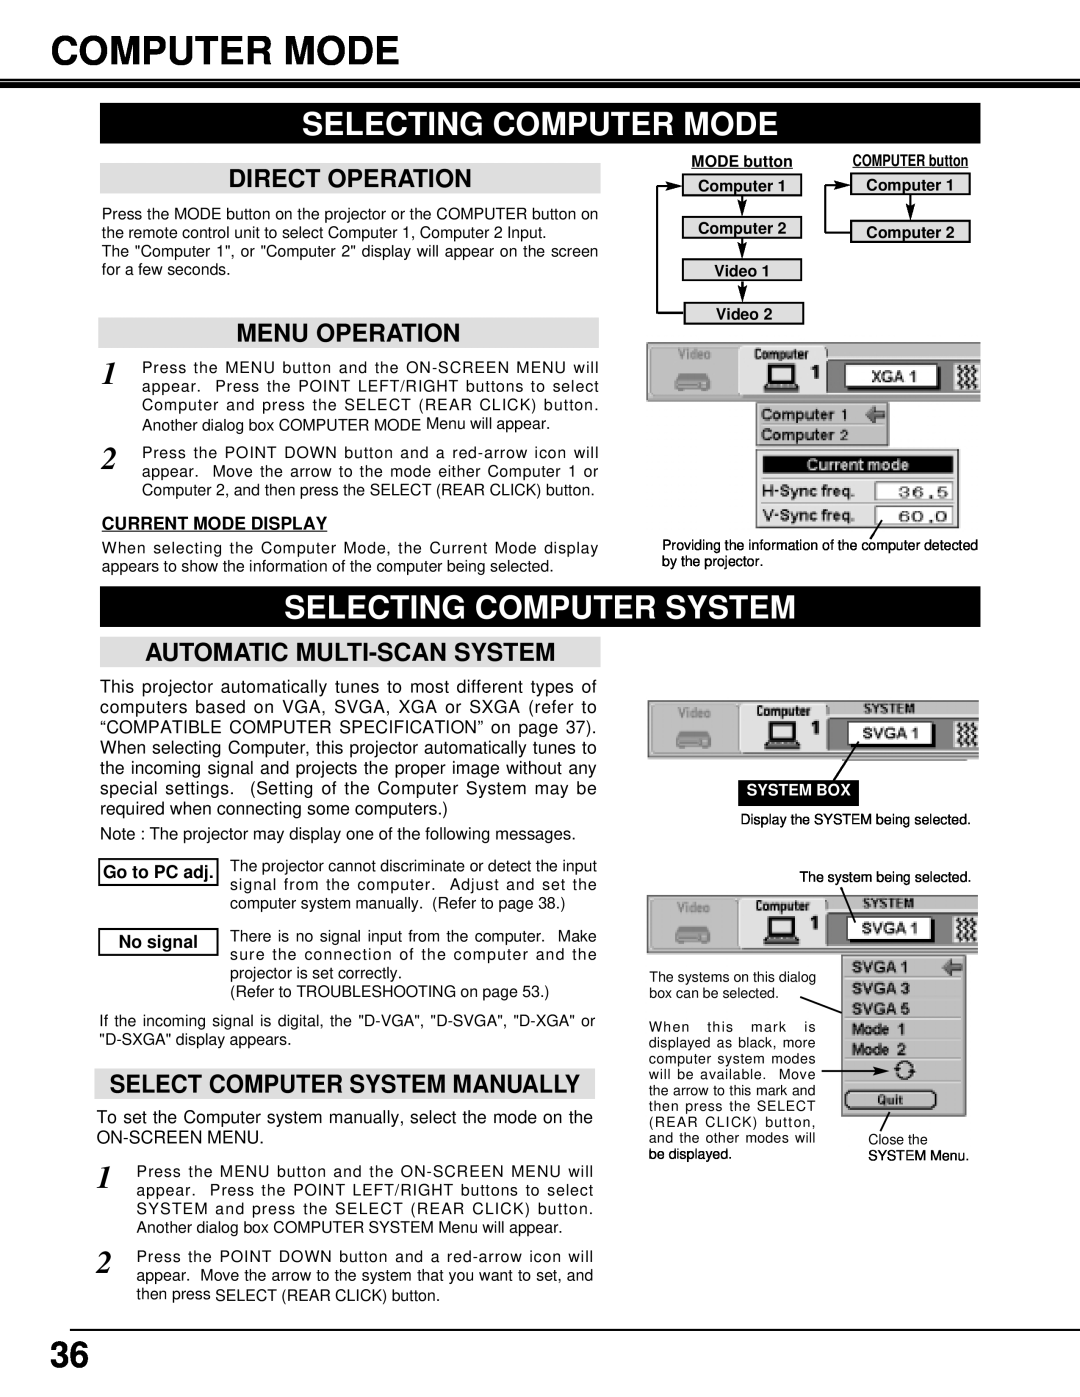 Eiki LC-X3/X3L Selecting Computer Mode, Selecting Computer System, Automatic Multi-Scan System, Current Mode Display 